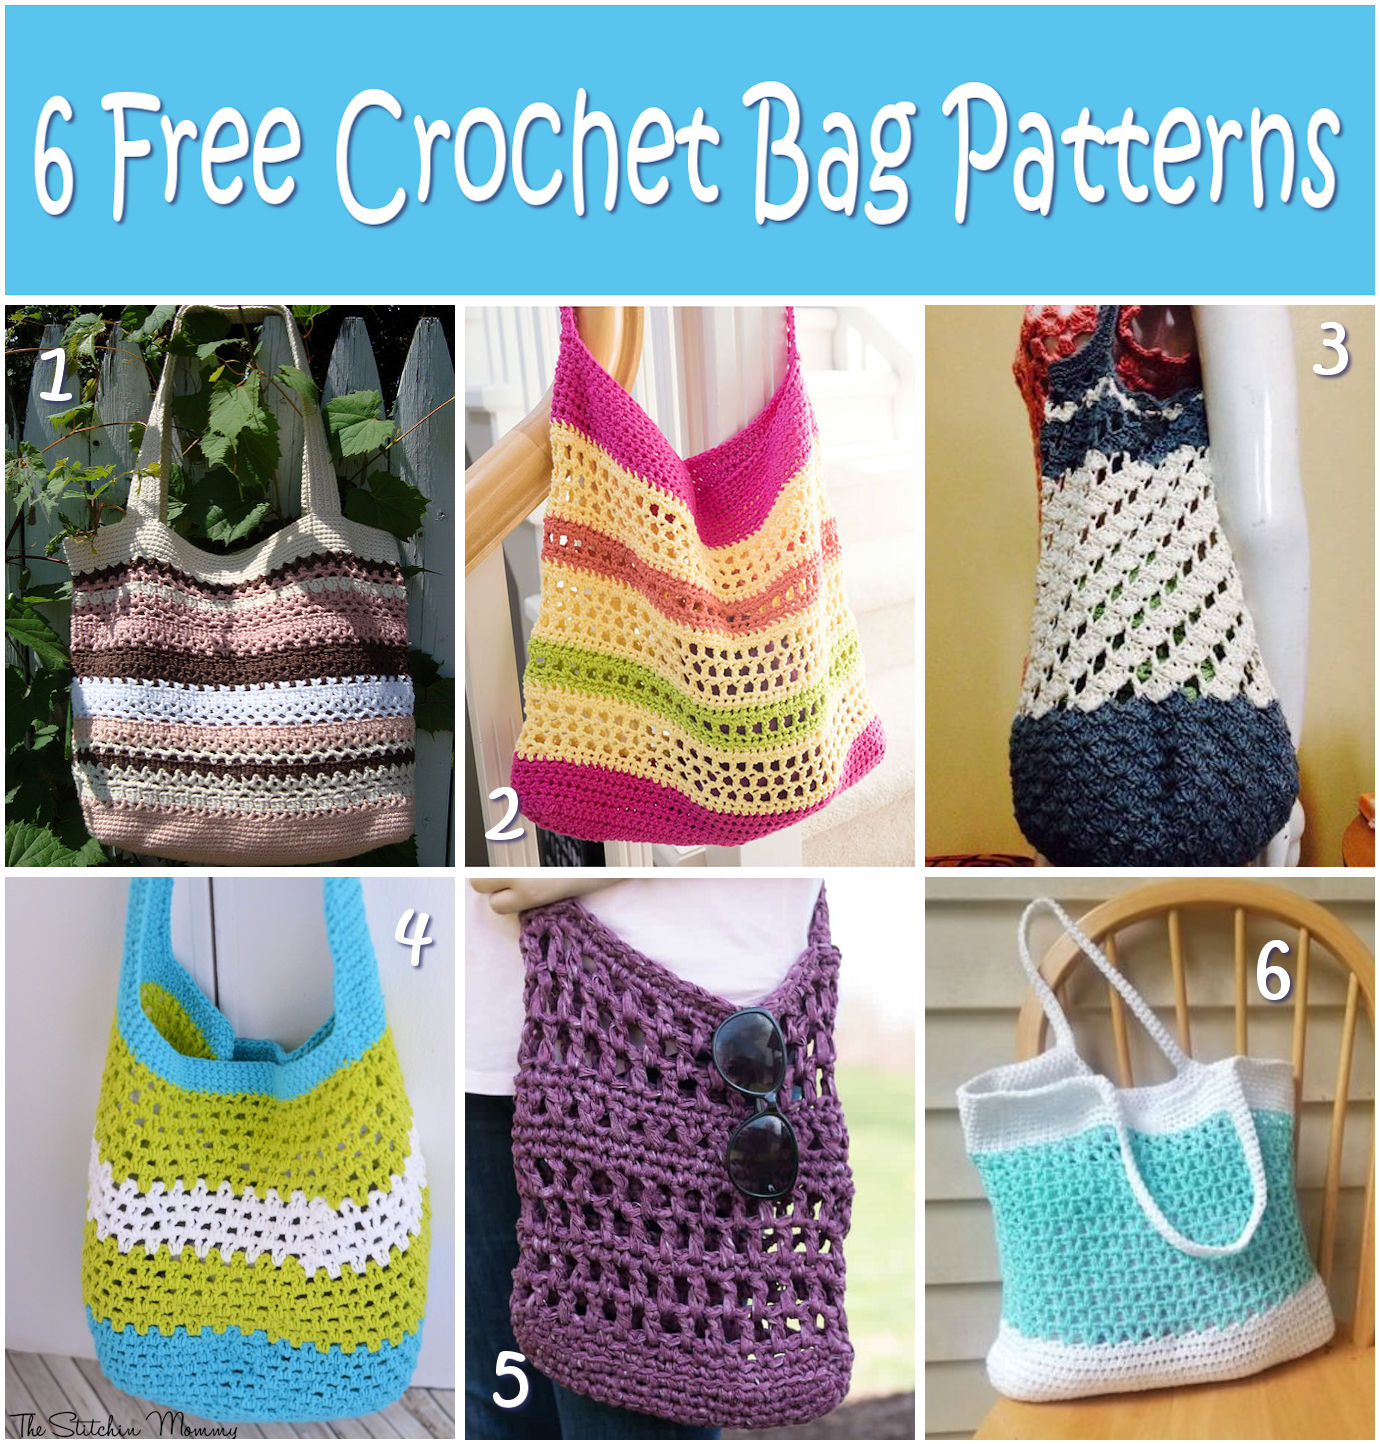 Knit Bag and Purse Patterns | Needlepointers.com